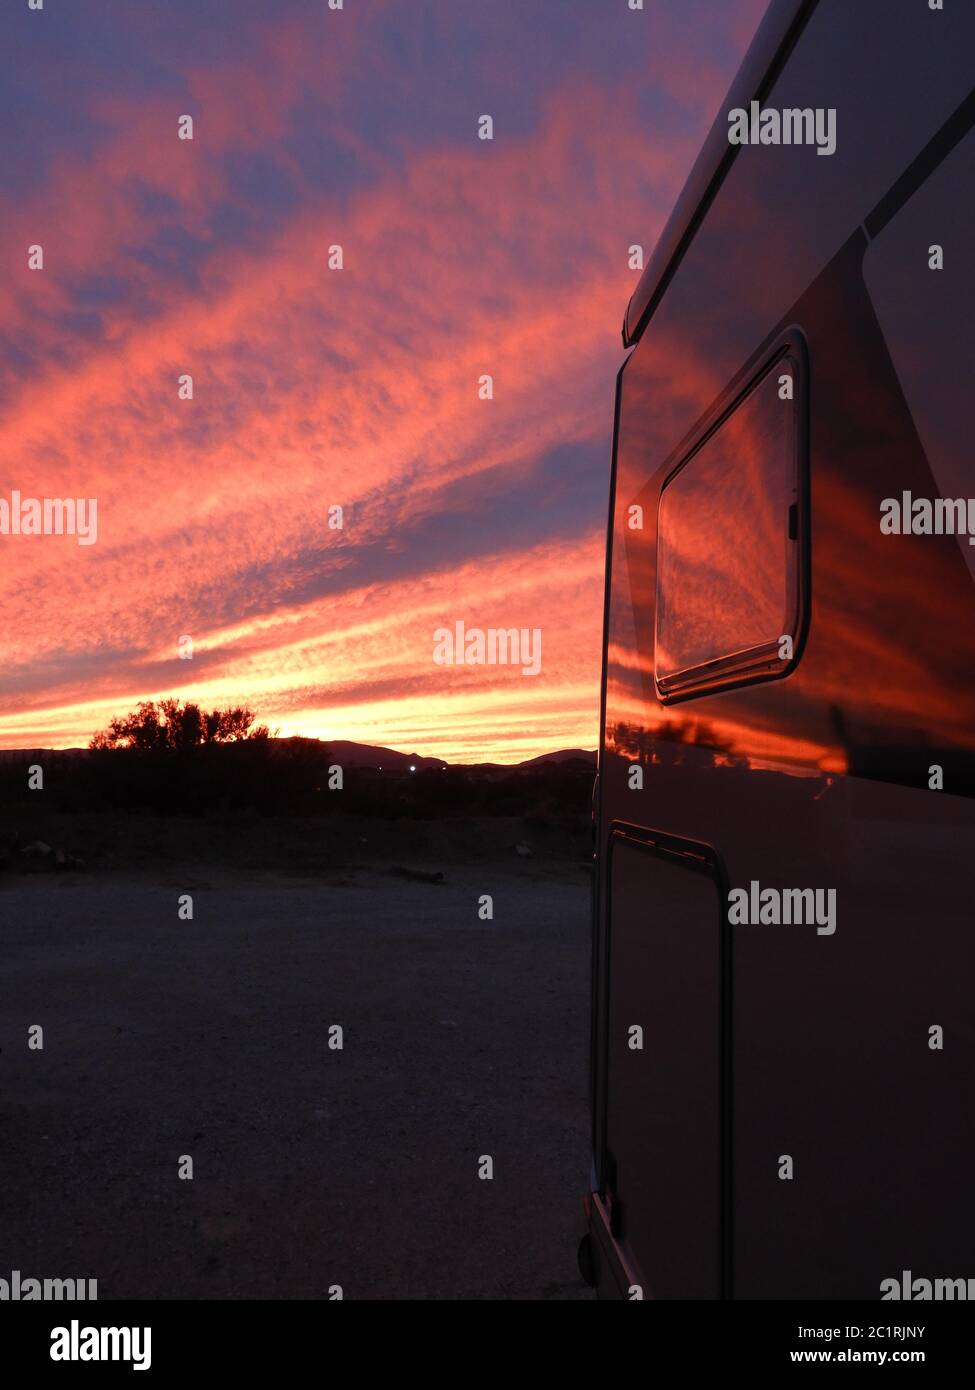 Colourfull red and orange sunset reflecting in a camper Stock Photo